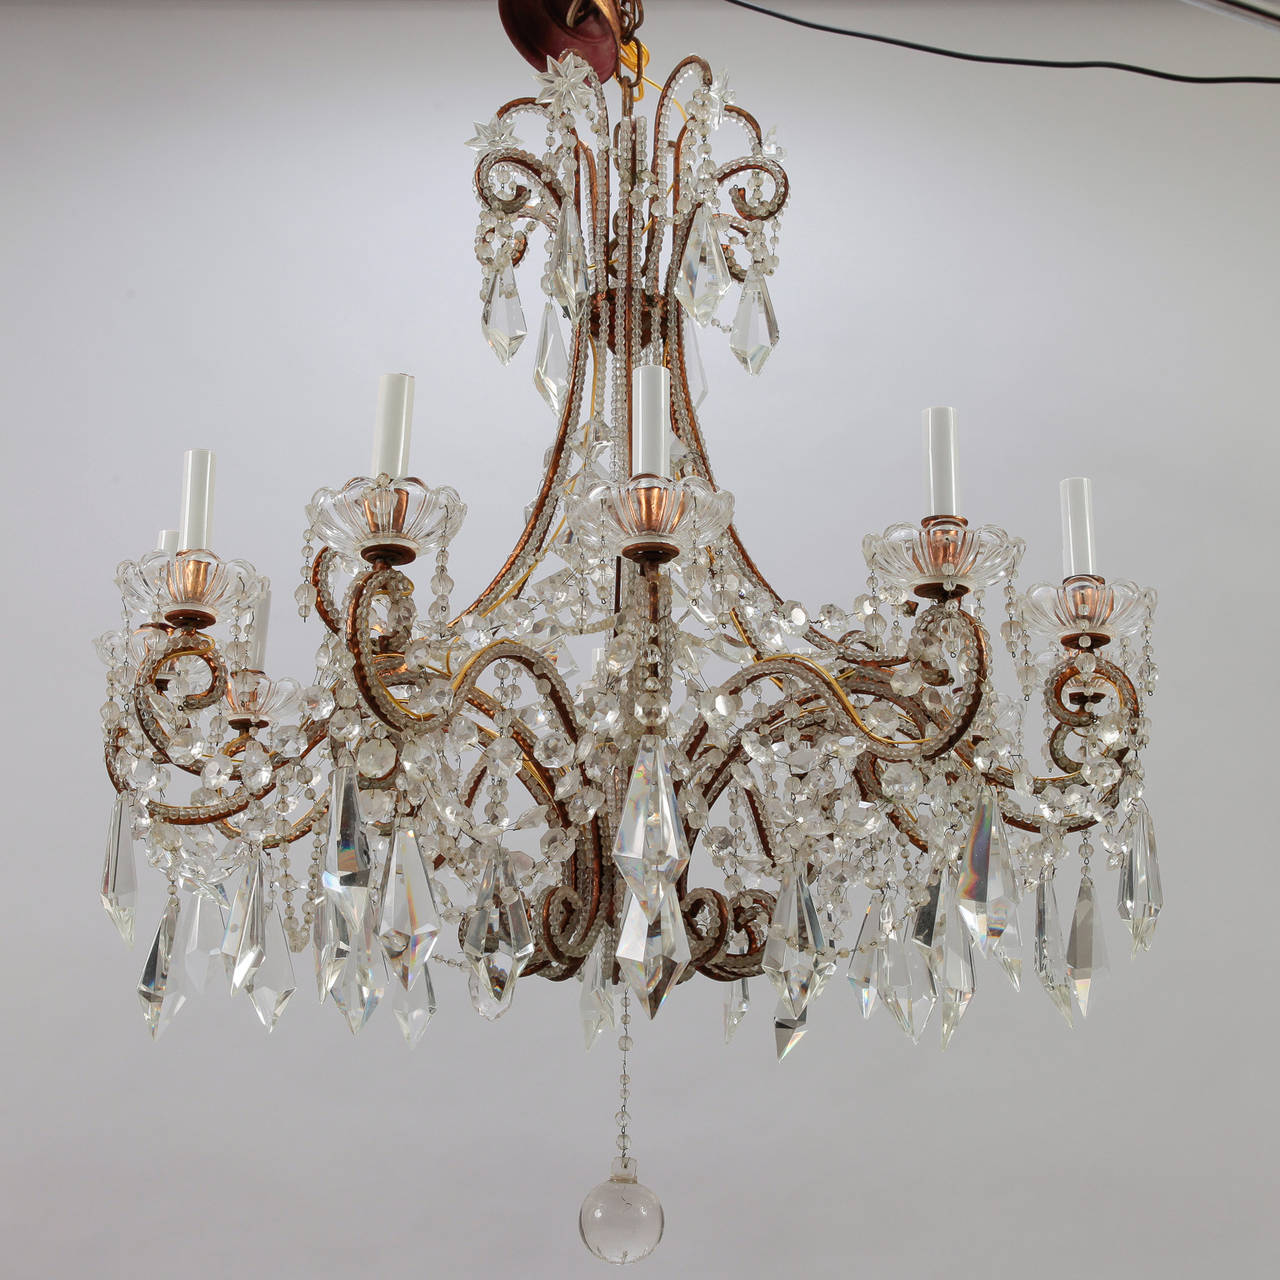 Twelve-Light Italian Crystal Chandelier with Large Drops and Lots of Beading 4